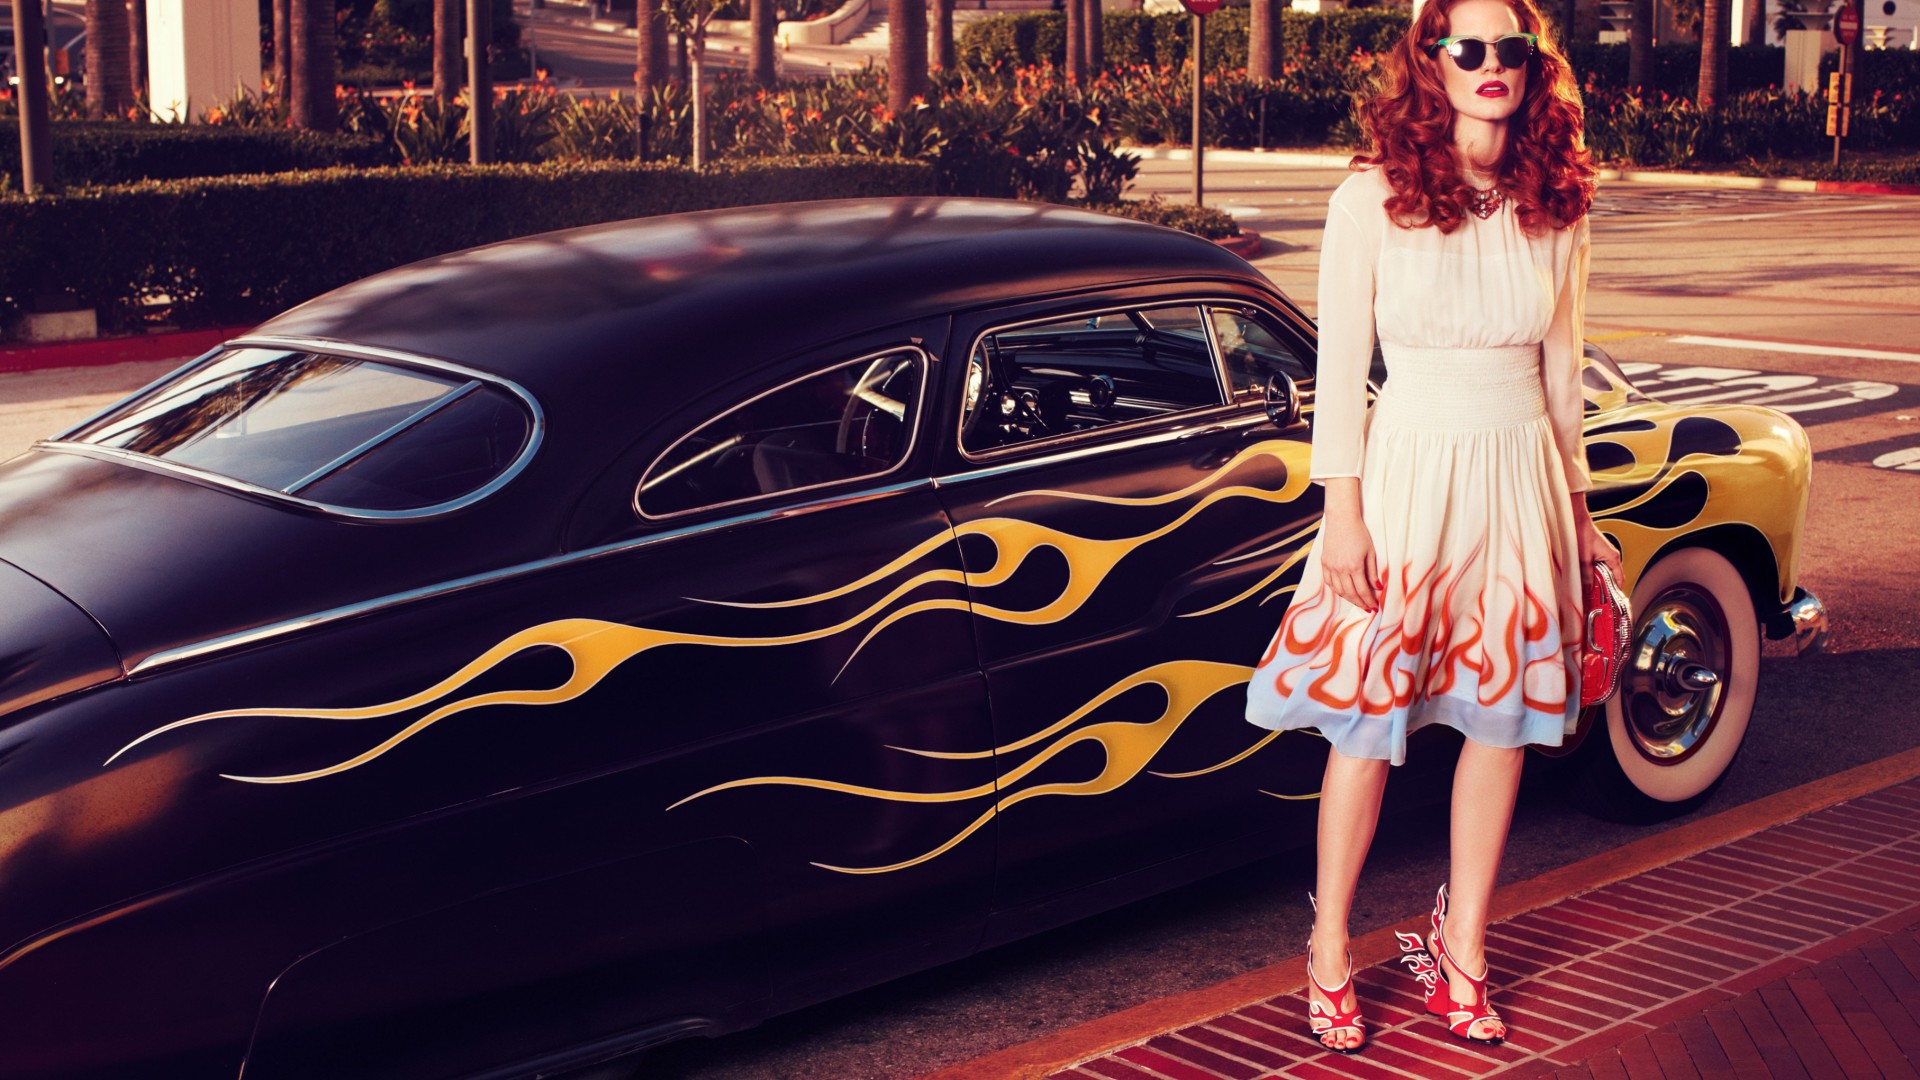 Jessica Chastain, Actress, television star, red hair, beauty, dress, red lips, car, glasses, Vogue Italia (horizontal)